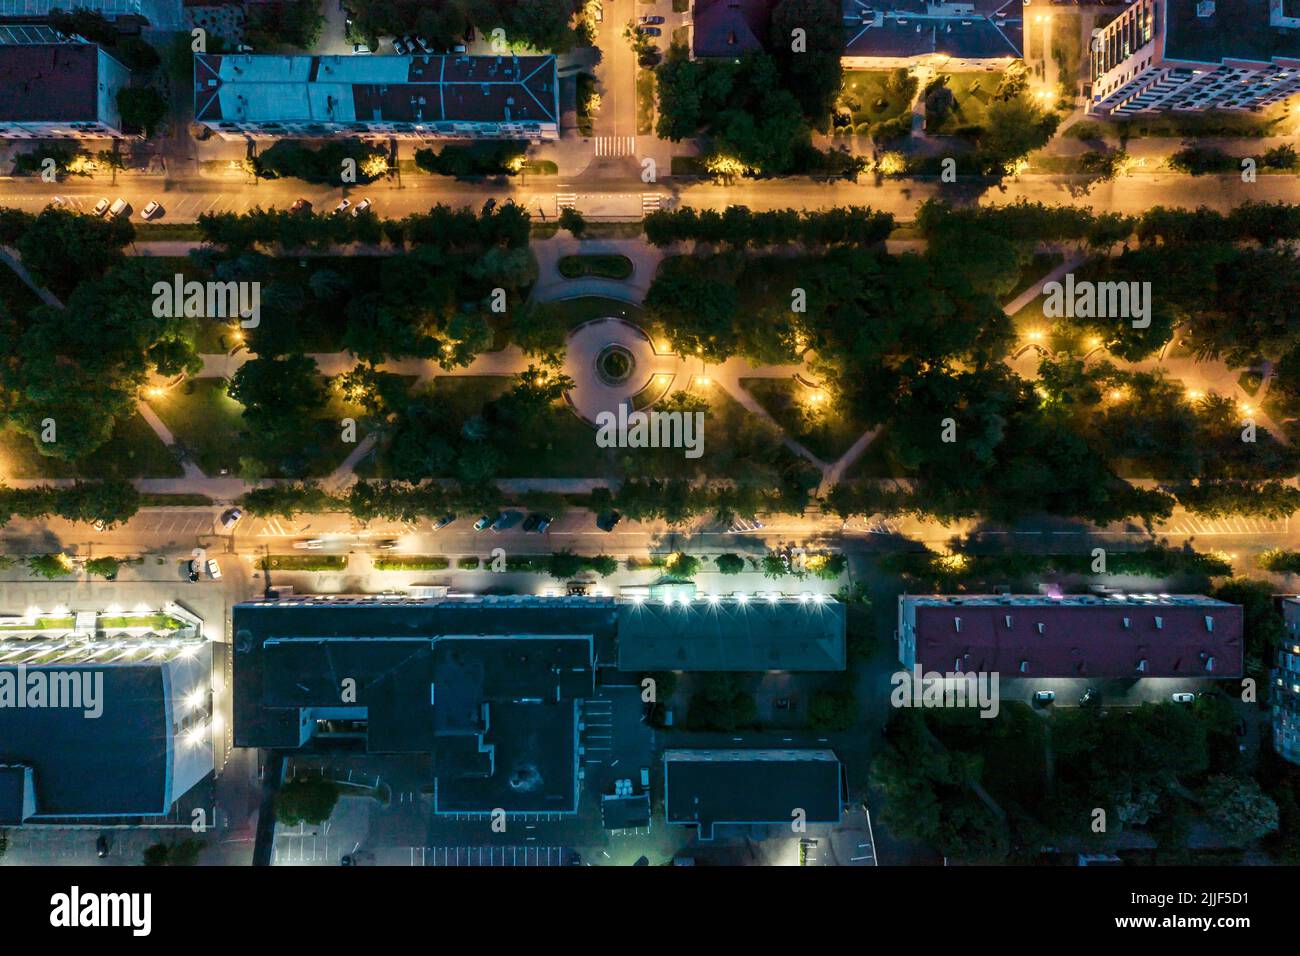 residential area with illuminated boulevard and parking lot with cars. night view. drone photo. Stock Photo